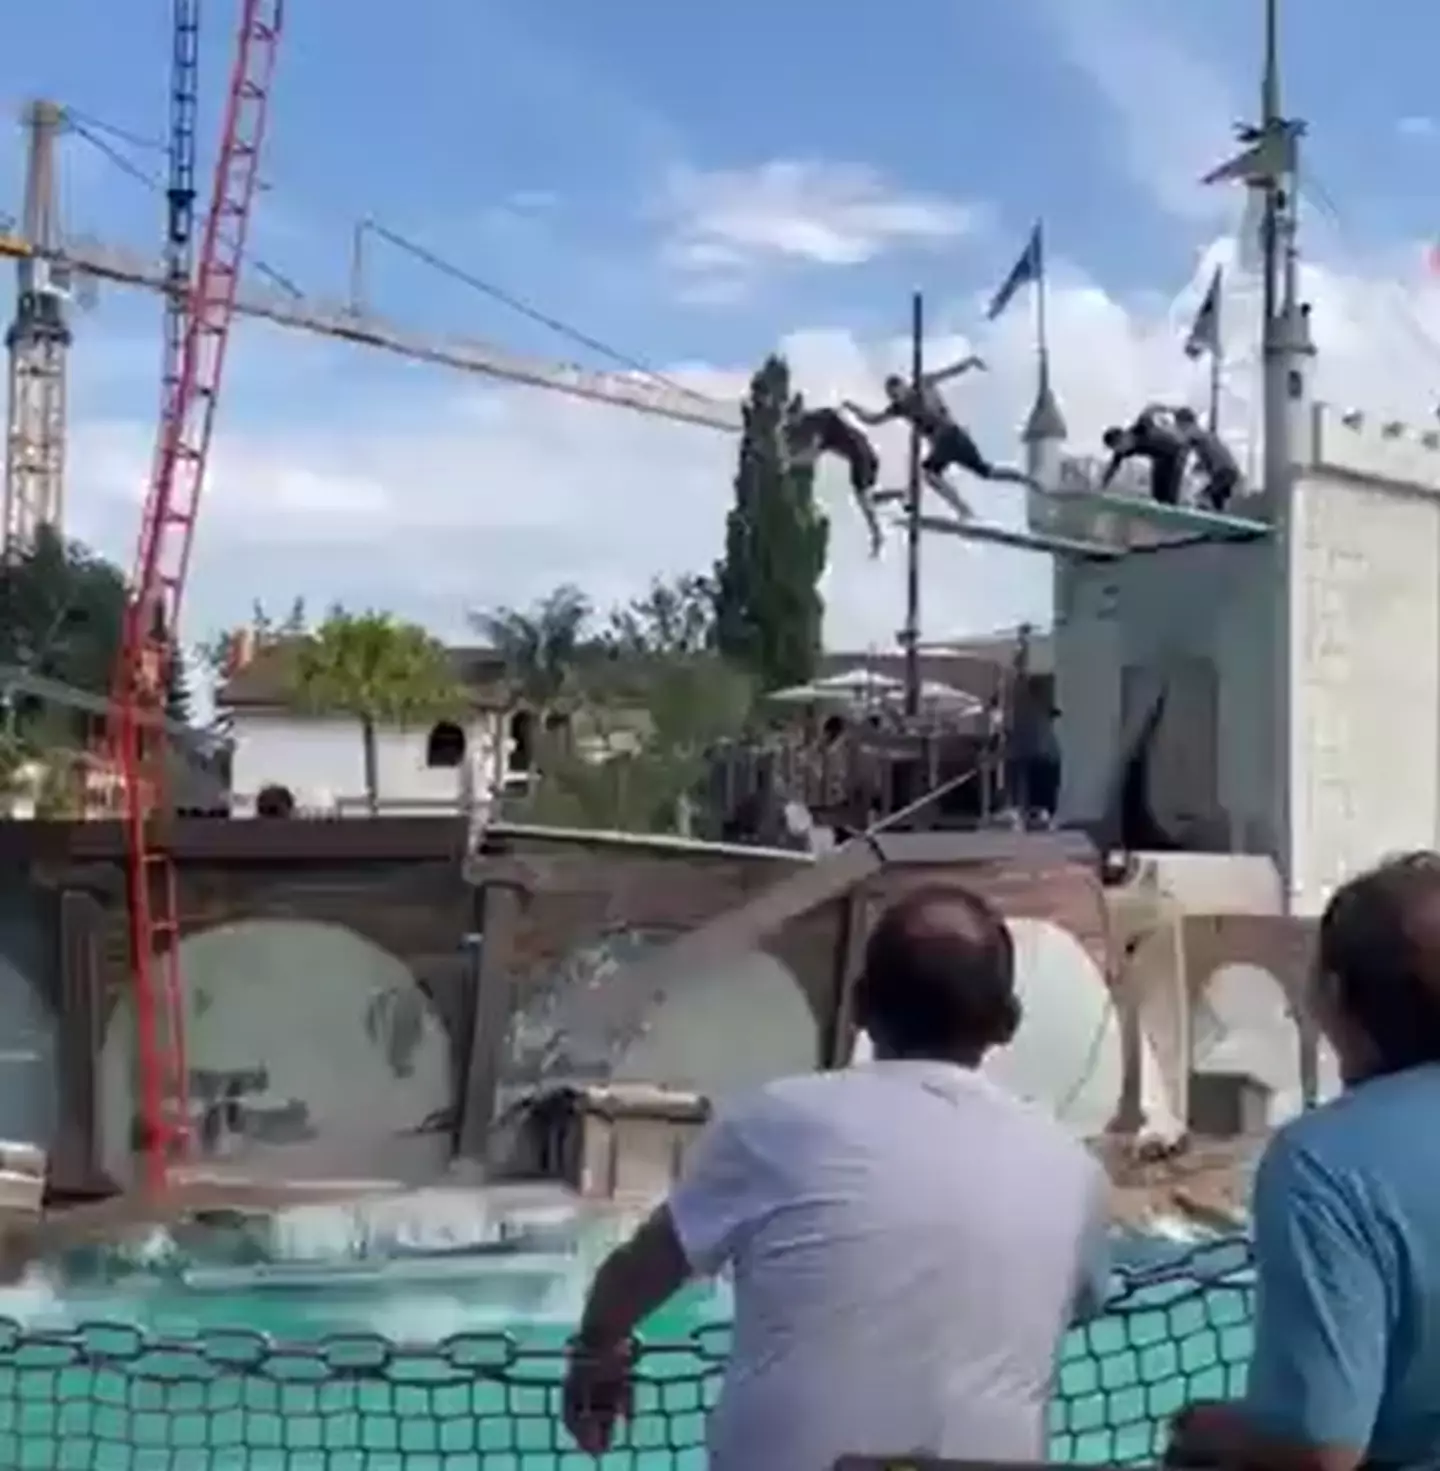 Footage of the collapsing platform showed performers diving from it right before it fell apart in the water.